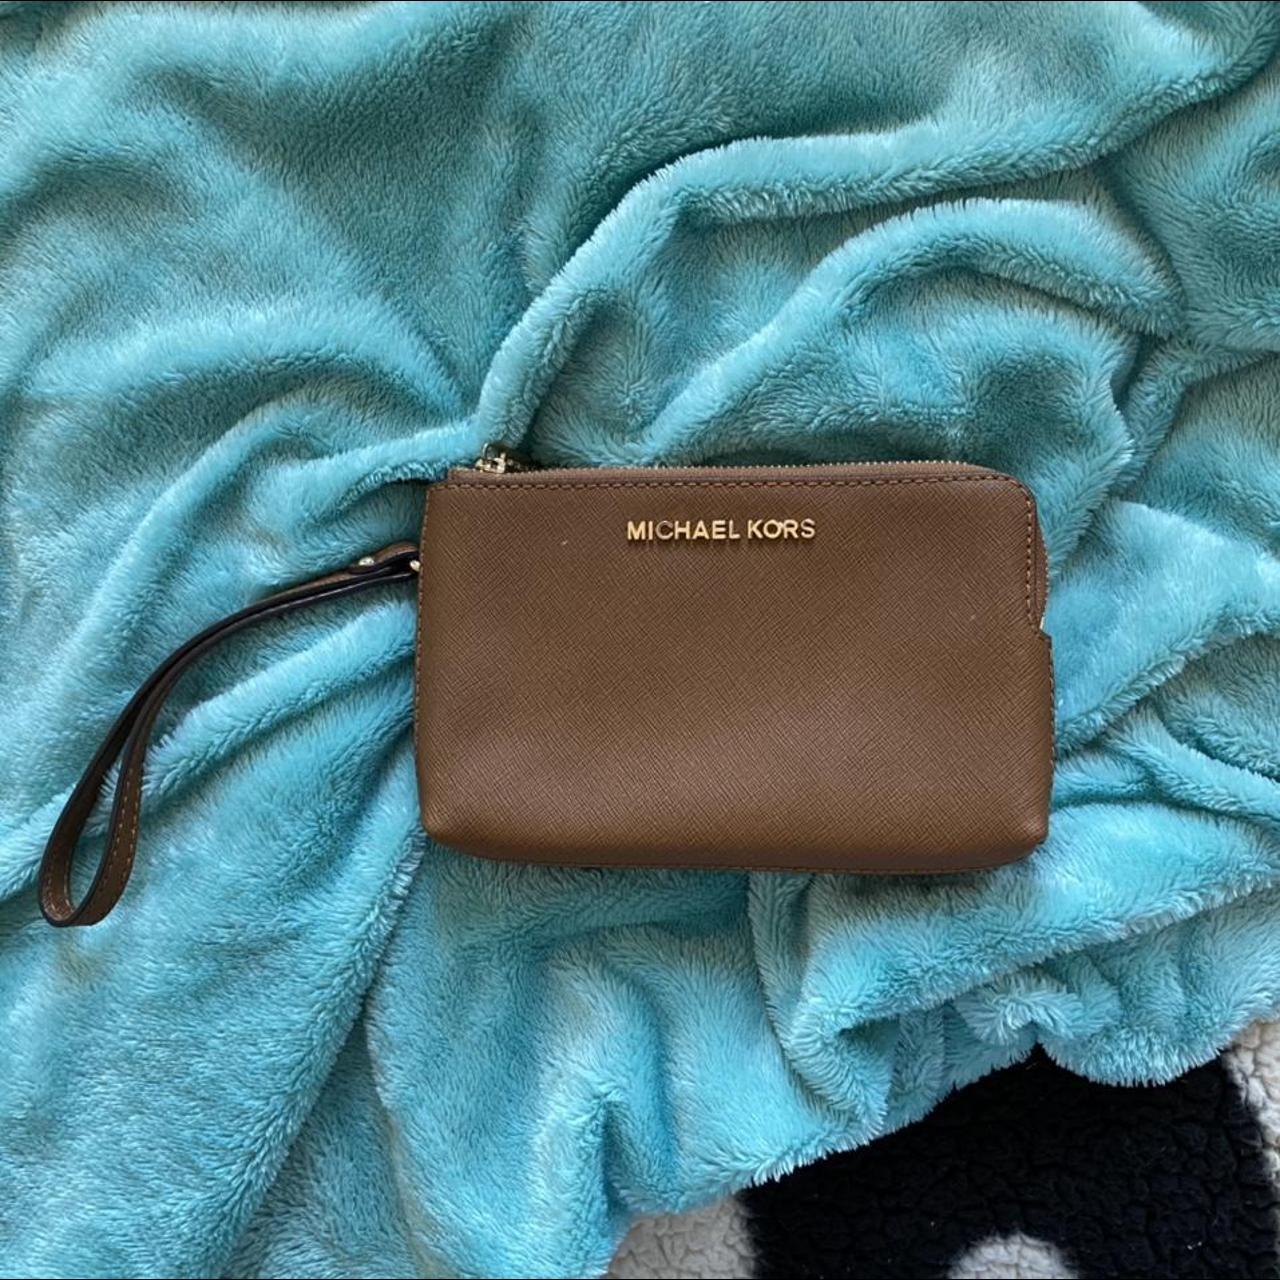 Product Image 1 - Michael kors wallet! Almost brand